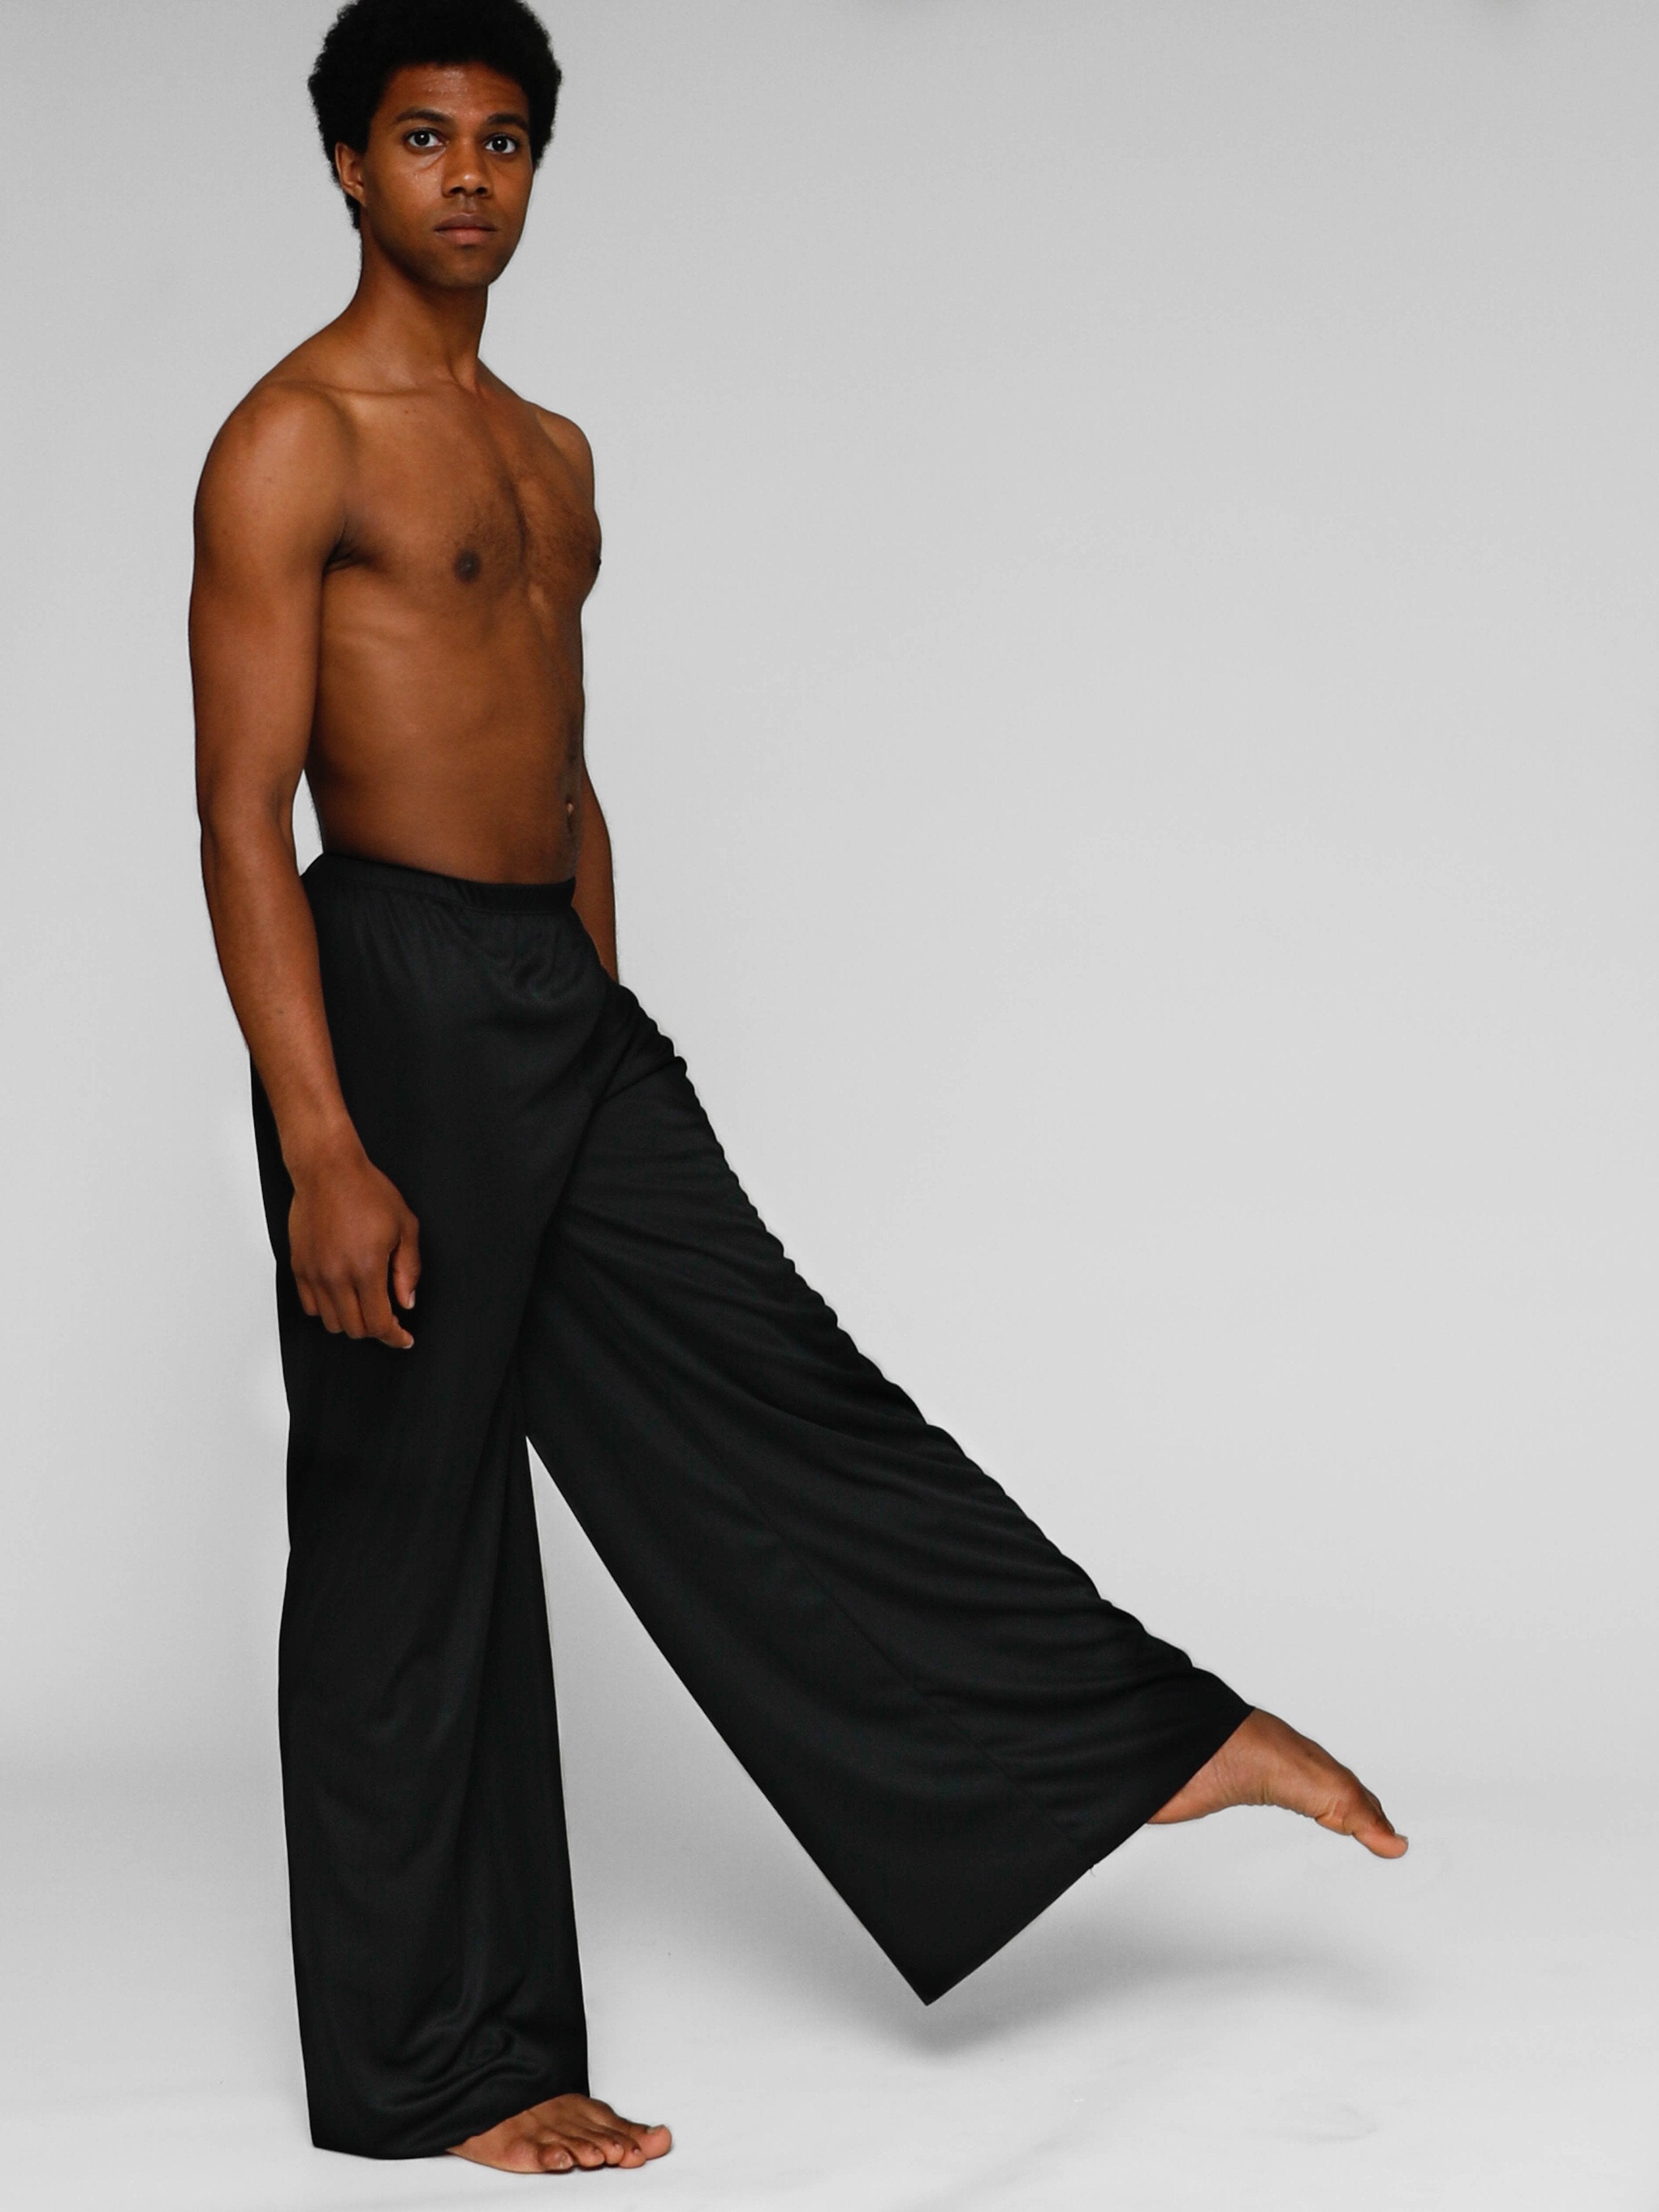 Mens Jazz Pants for Dance Adult Sizes